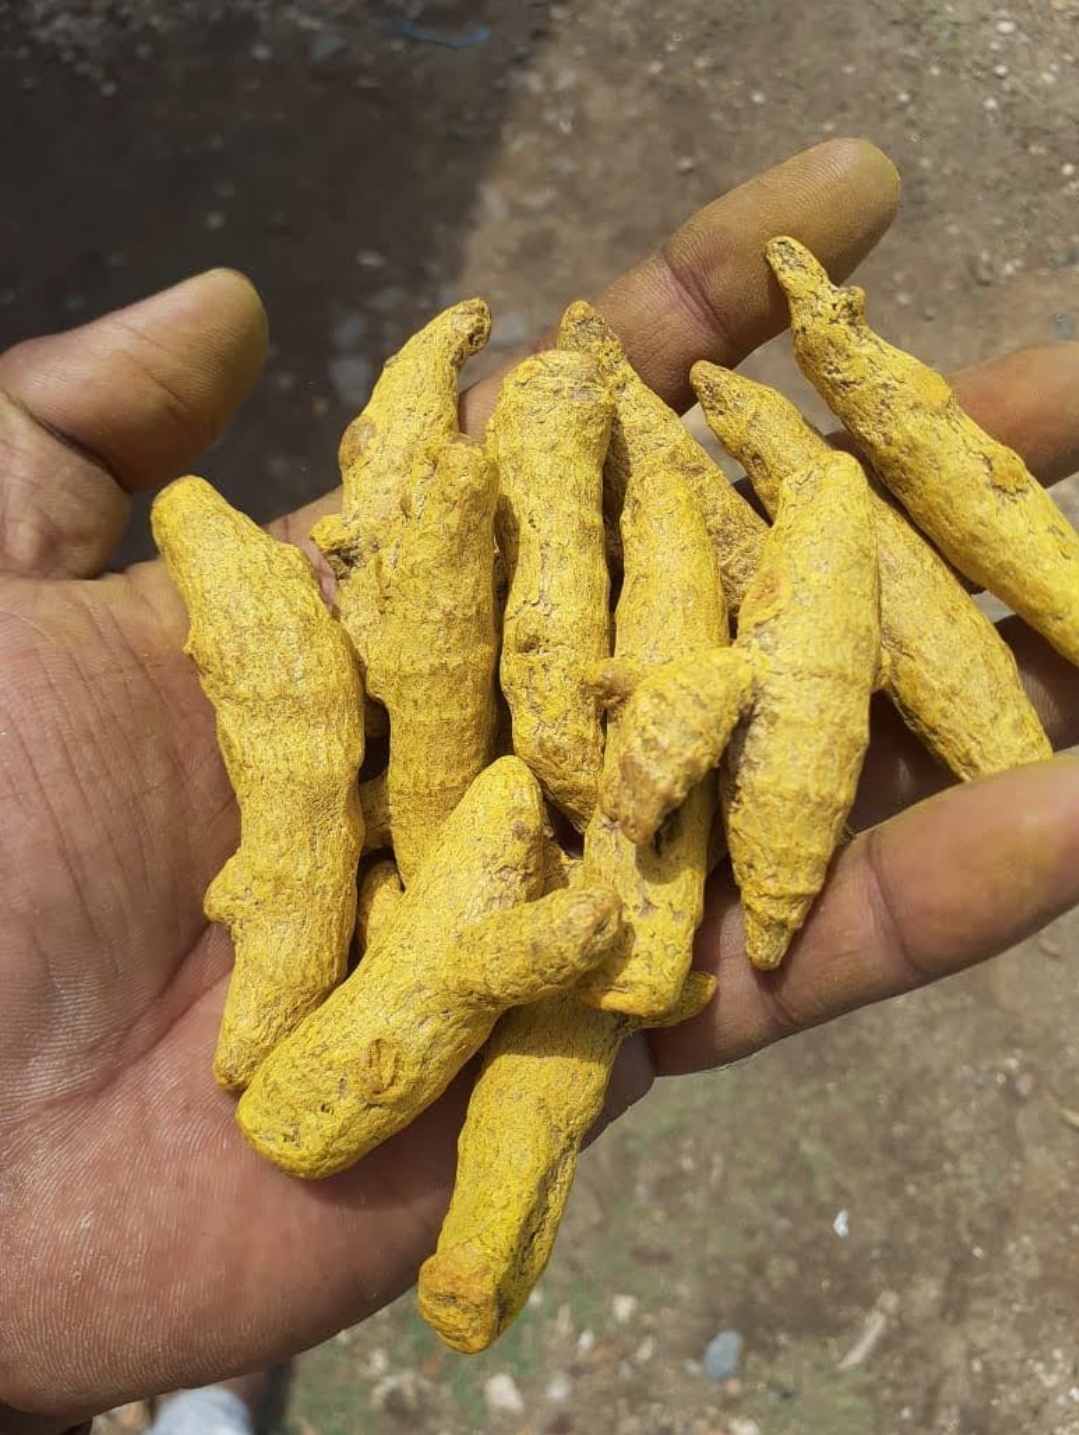 In Bulk Whole Turmeric Finger Export Quality